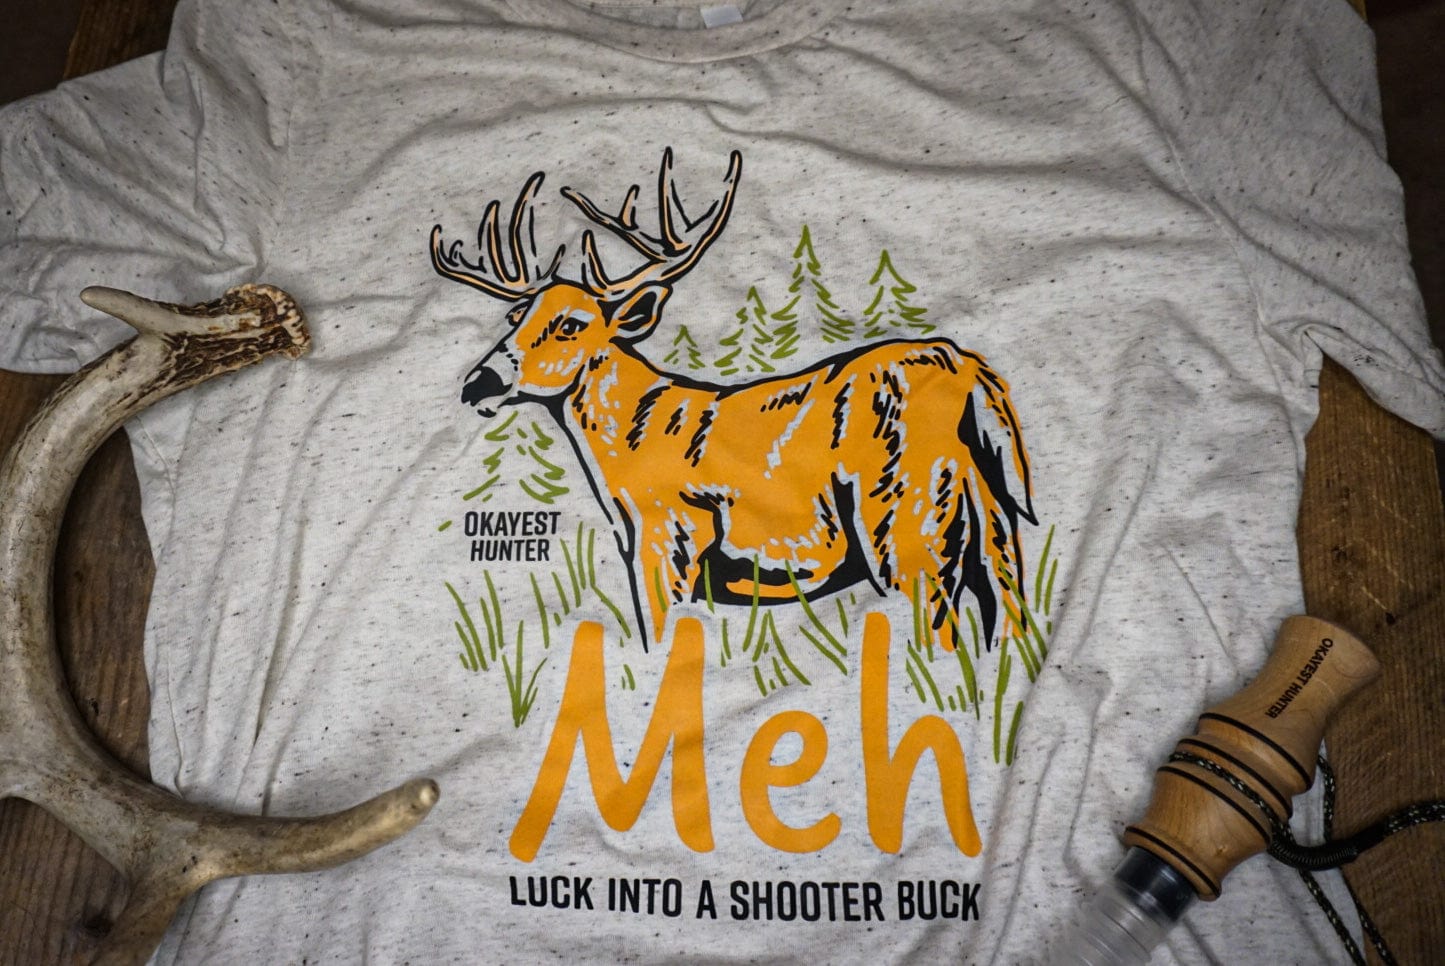 The luck buck lucky hunting t-shirt – The Okayest Hunter